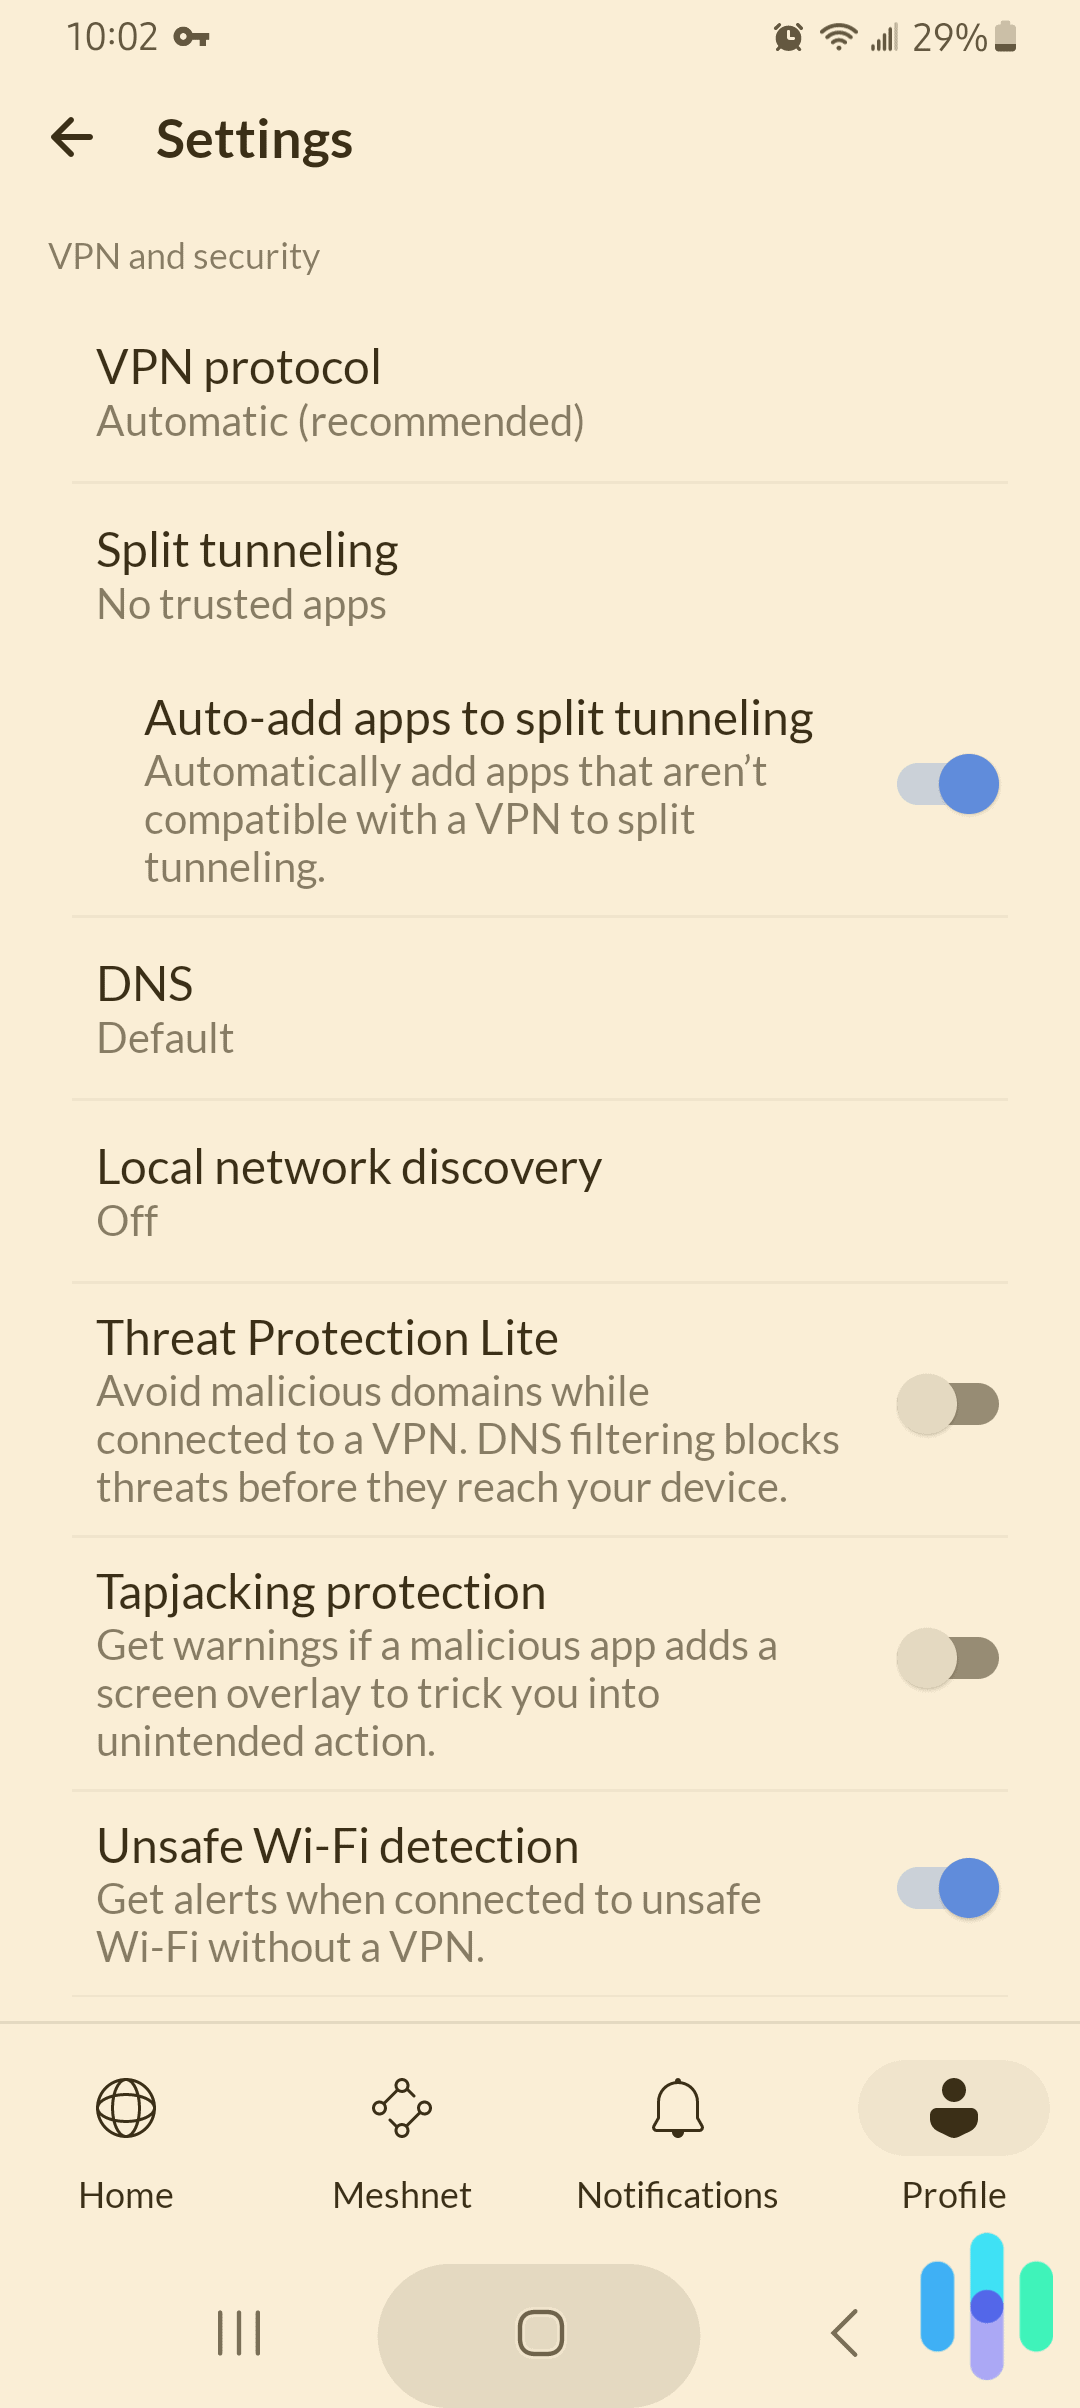 NordVPN settings on the Android App